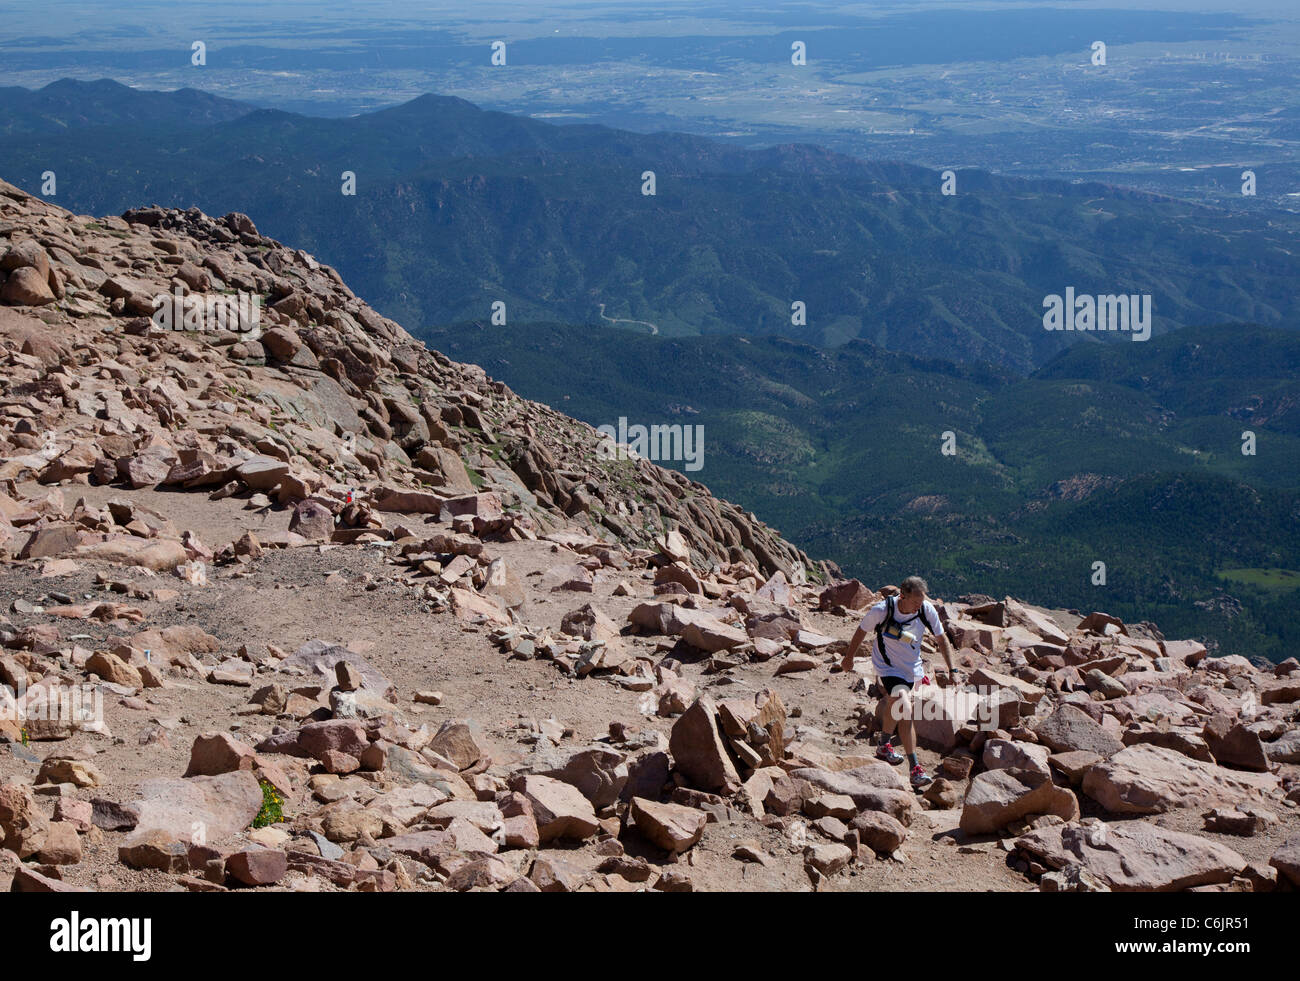 Colorado Springs, Colorado - A runner on the Barr Trail, a 12.6-mile trail that climbs to the 14,110-foot summit of Pikes Peak. Stock Photo